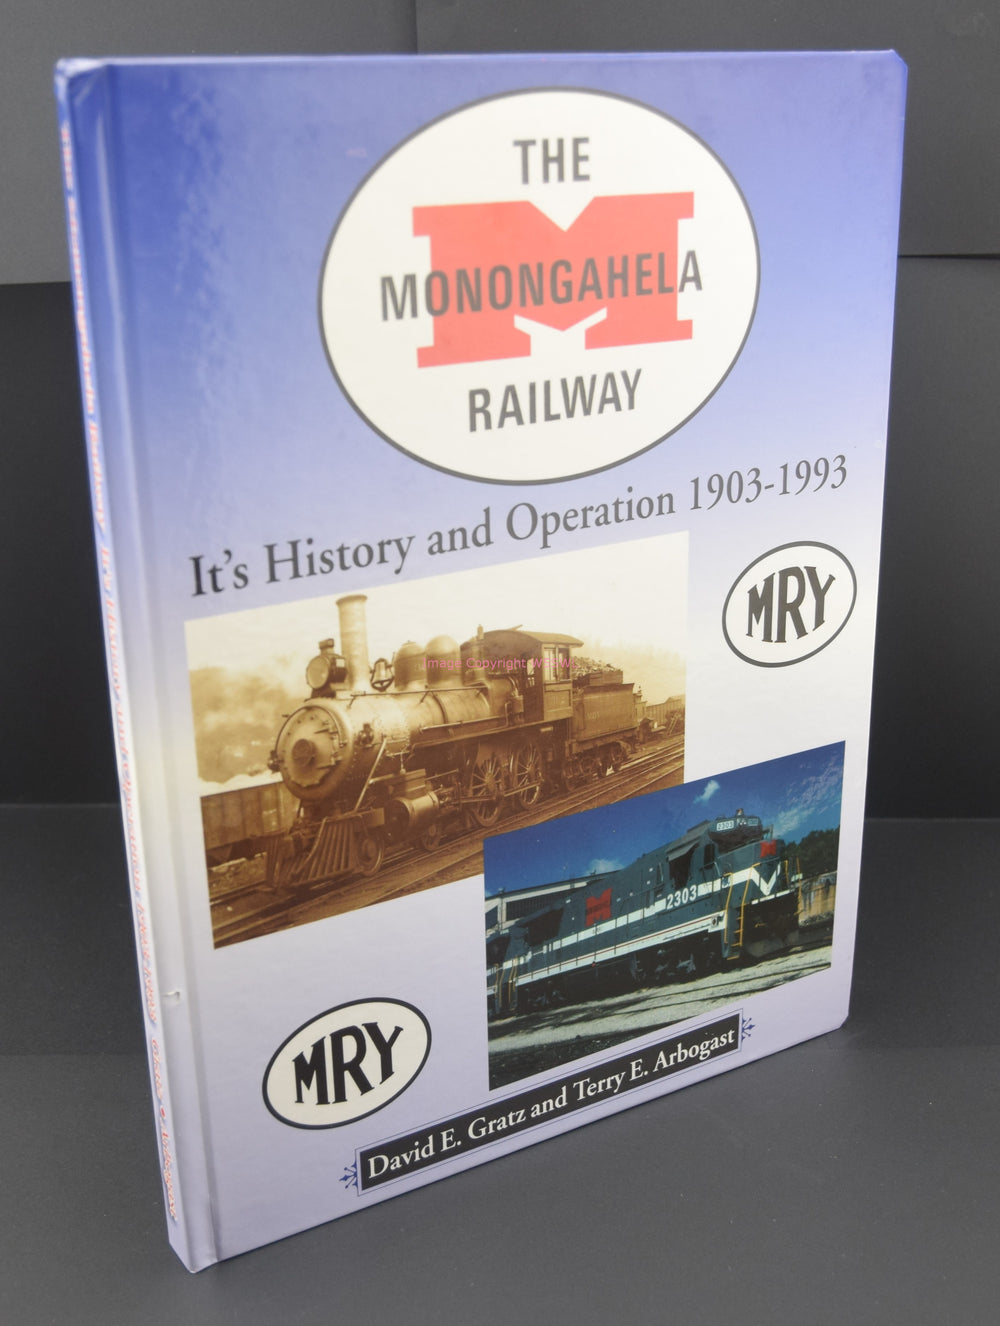 The Monongahela Railway History Operation 1903-1993 Signed 2003 1st Edition - Dave's Hobby Shop by W5SWL